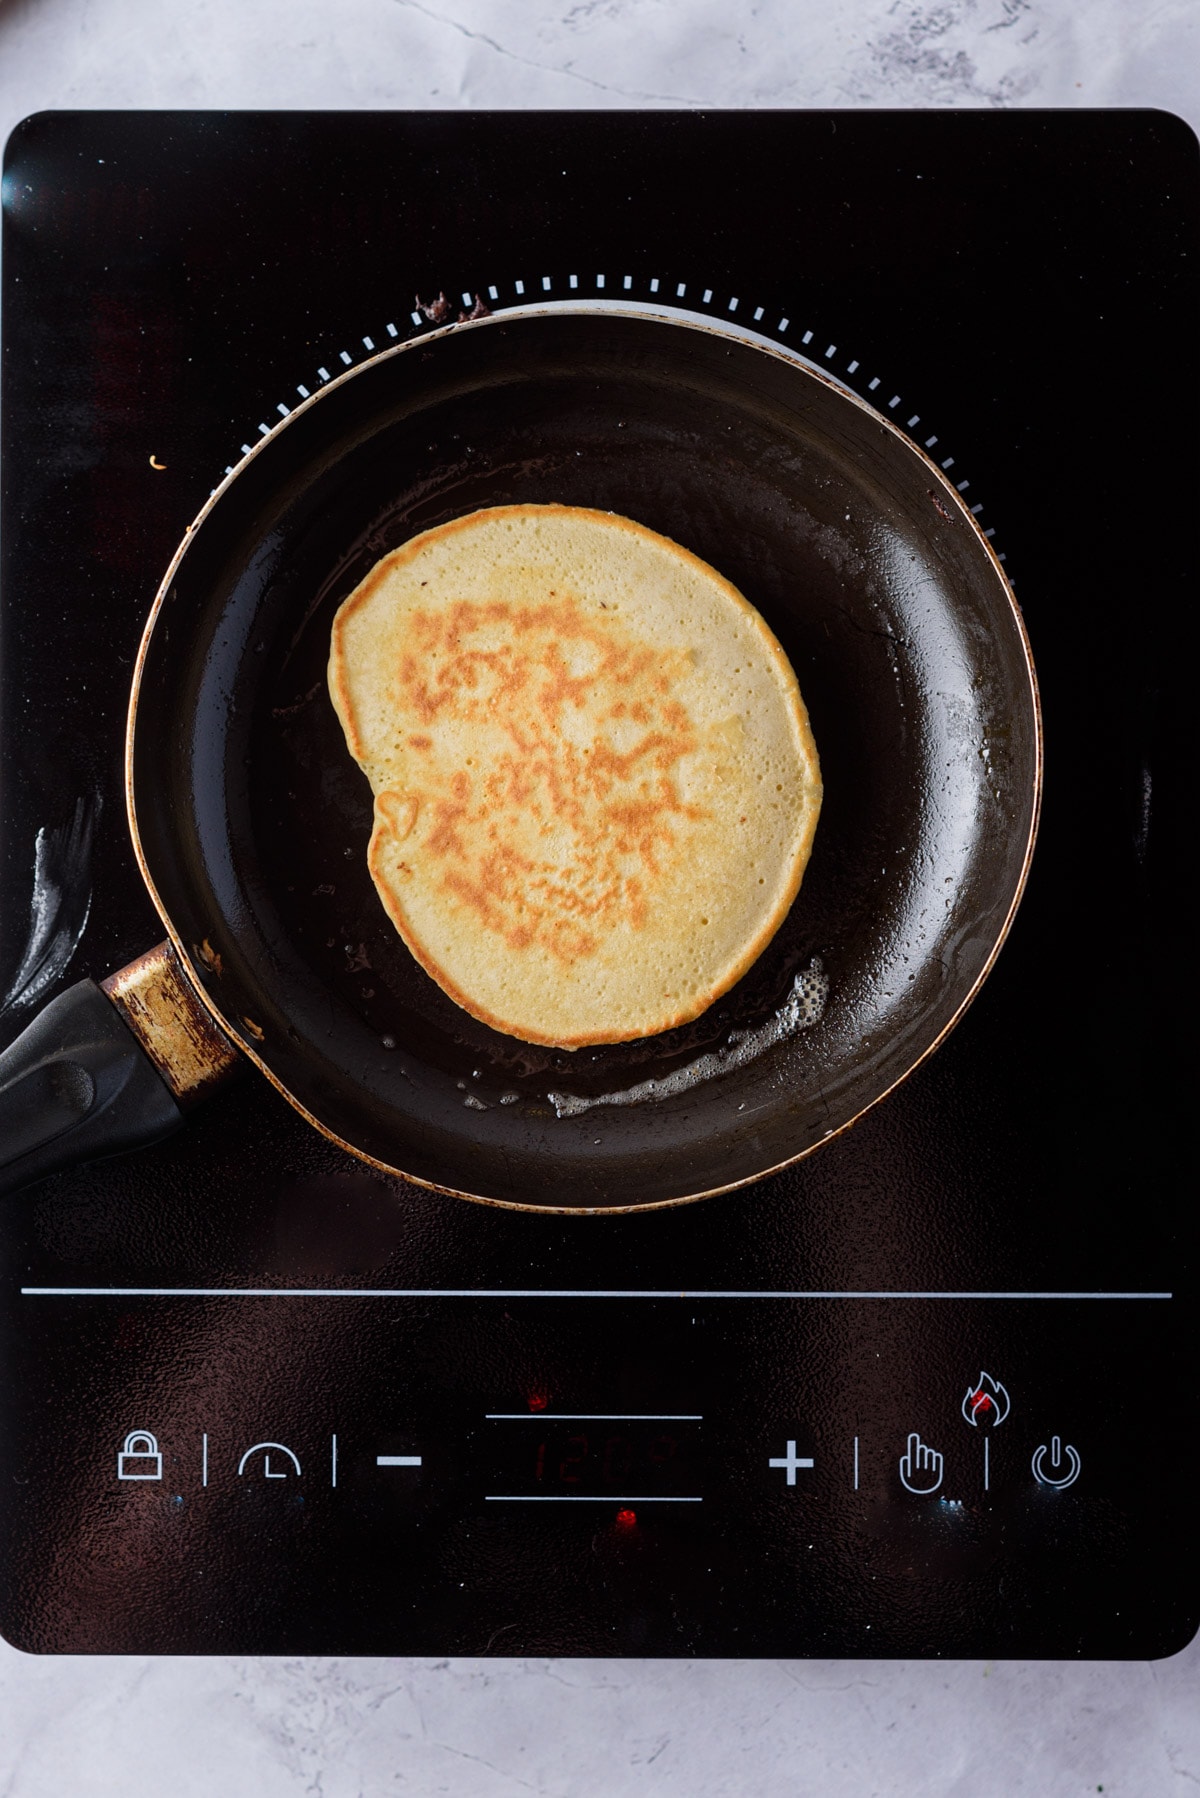 Pancake cooking in skillet with cooked side up